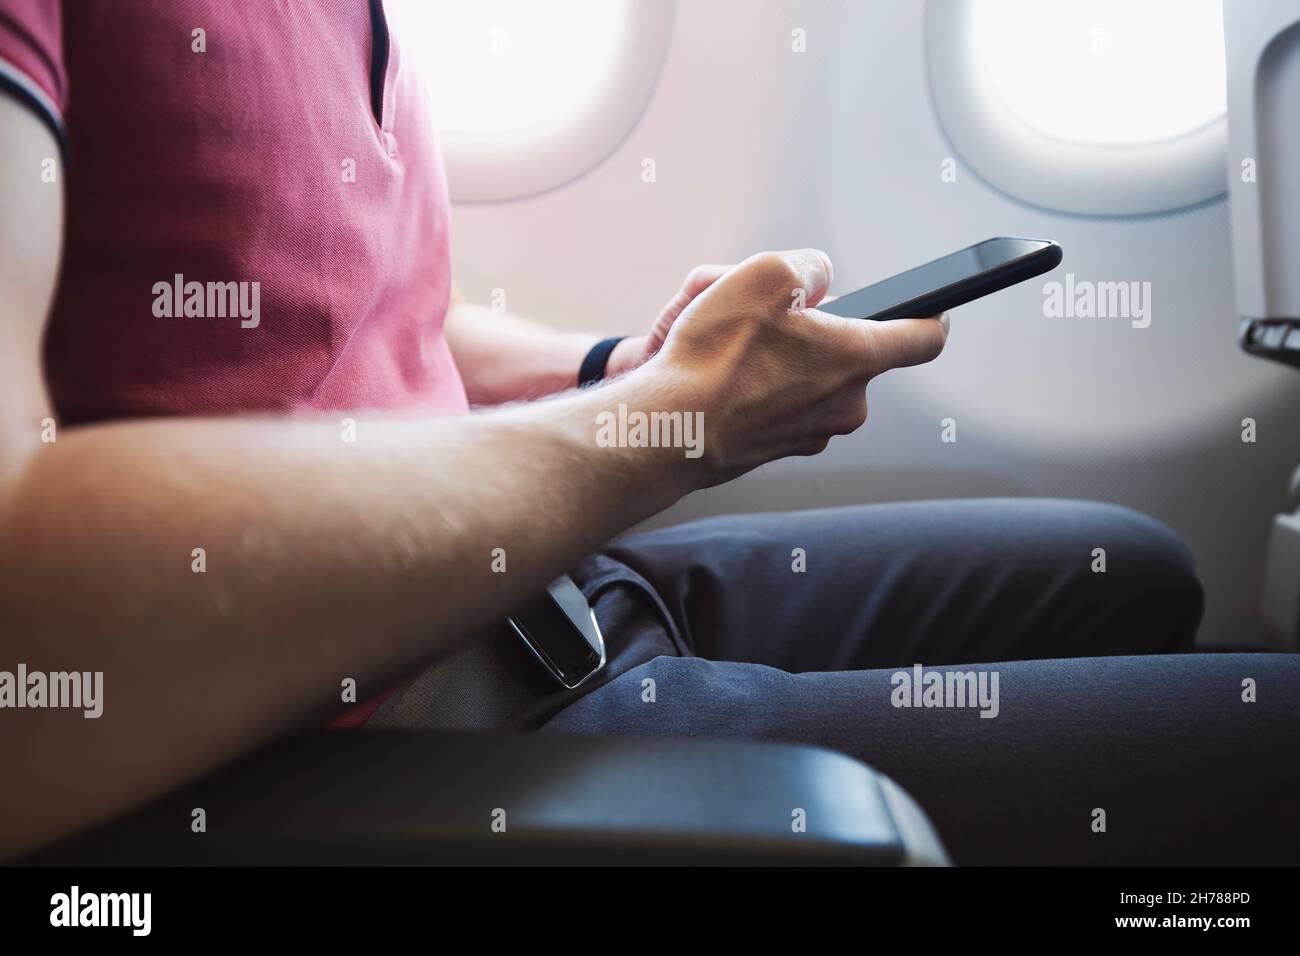 Hands holding smart phone in airplane. Passenger using internet connection during flight. Stock Photo